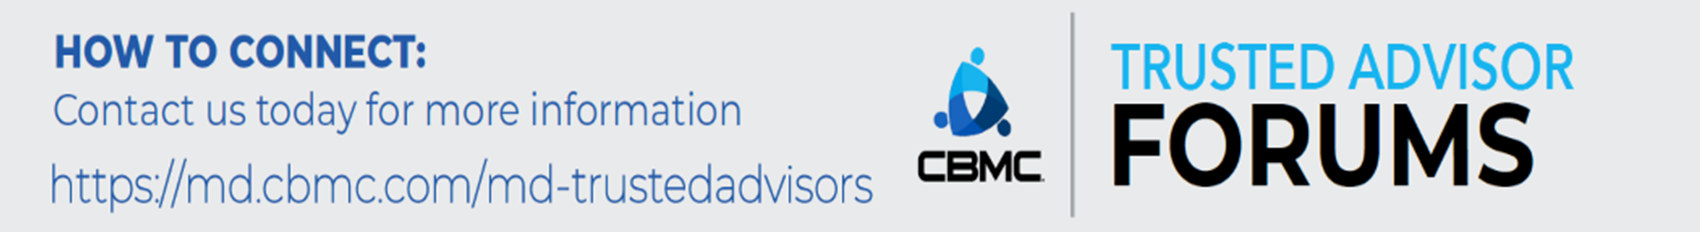 How to connect with CBMC Maryland Trusted Advisor Forums